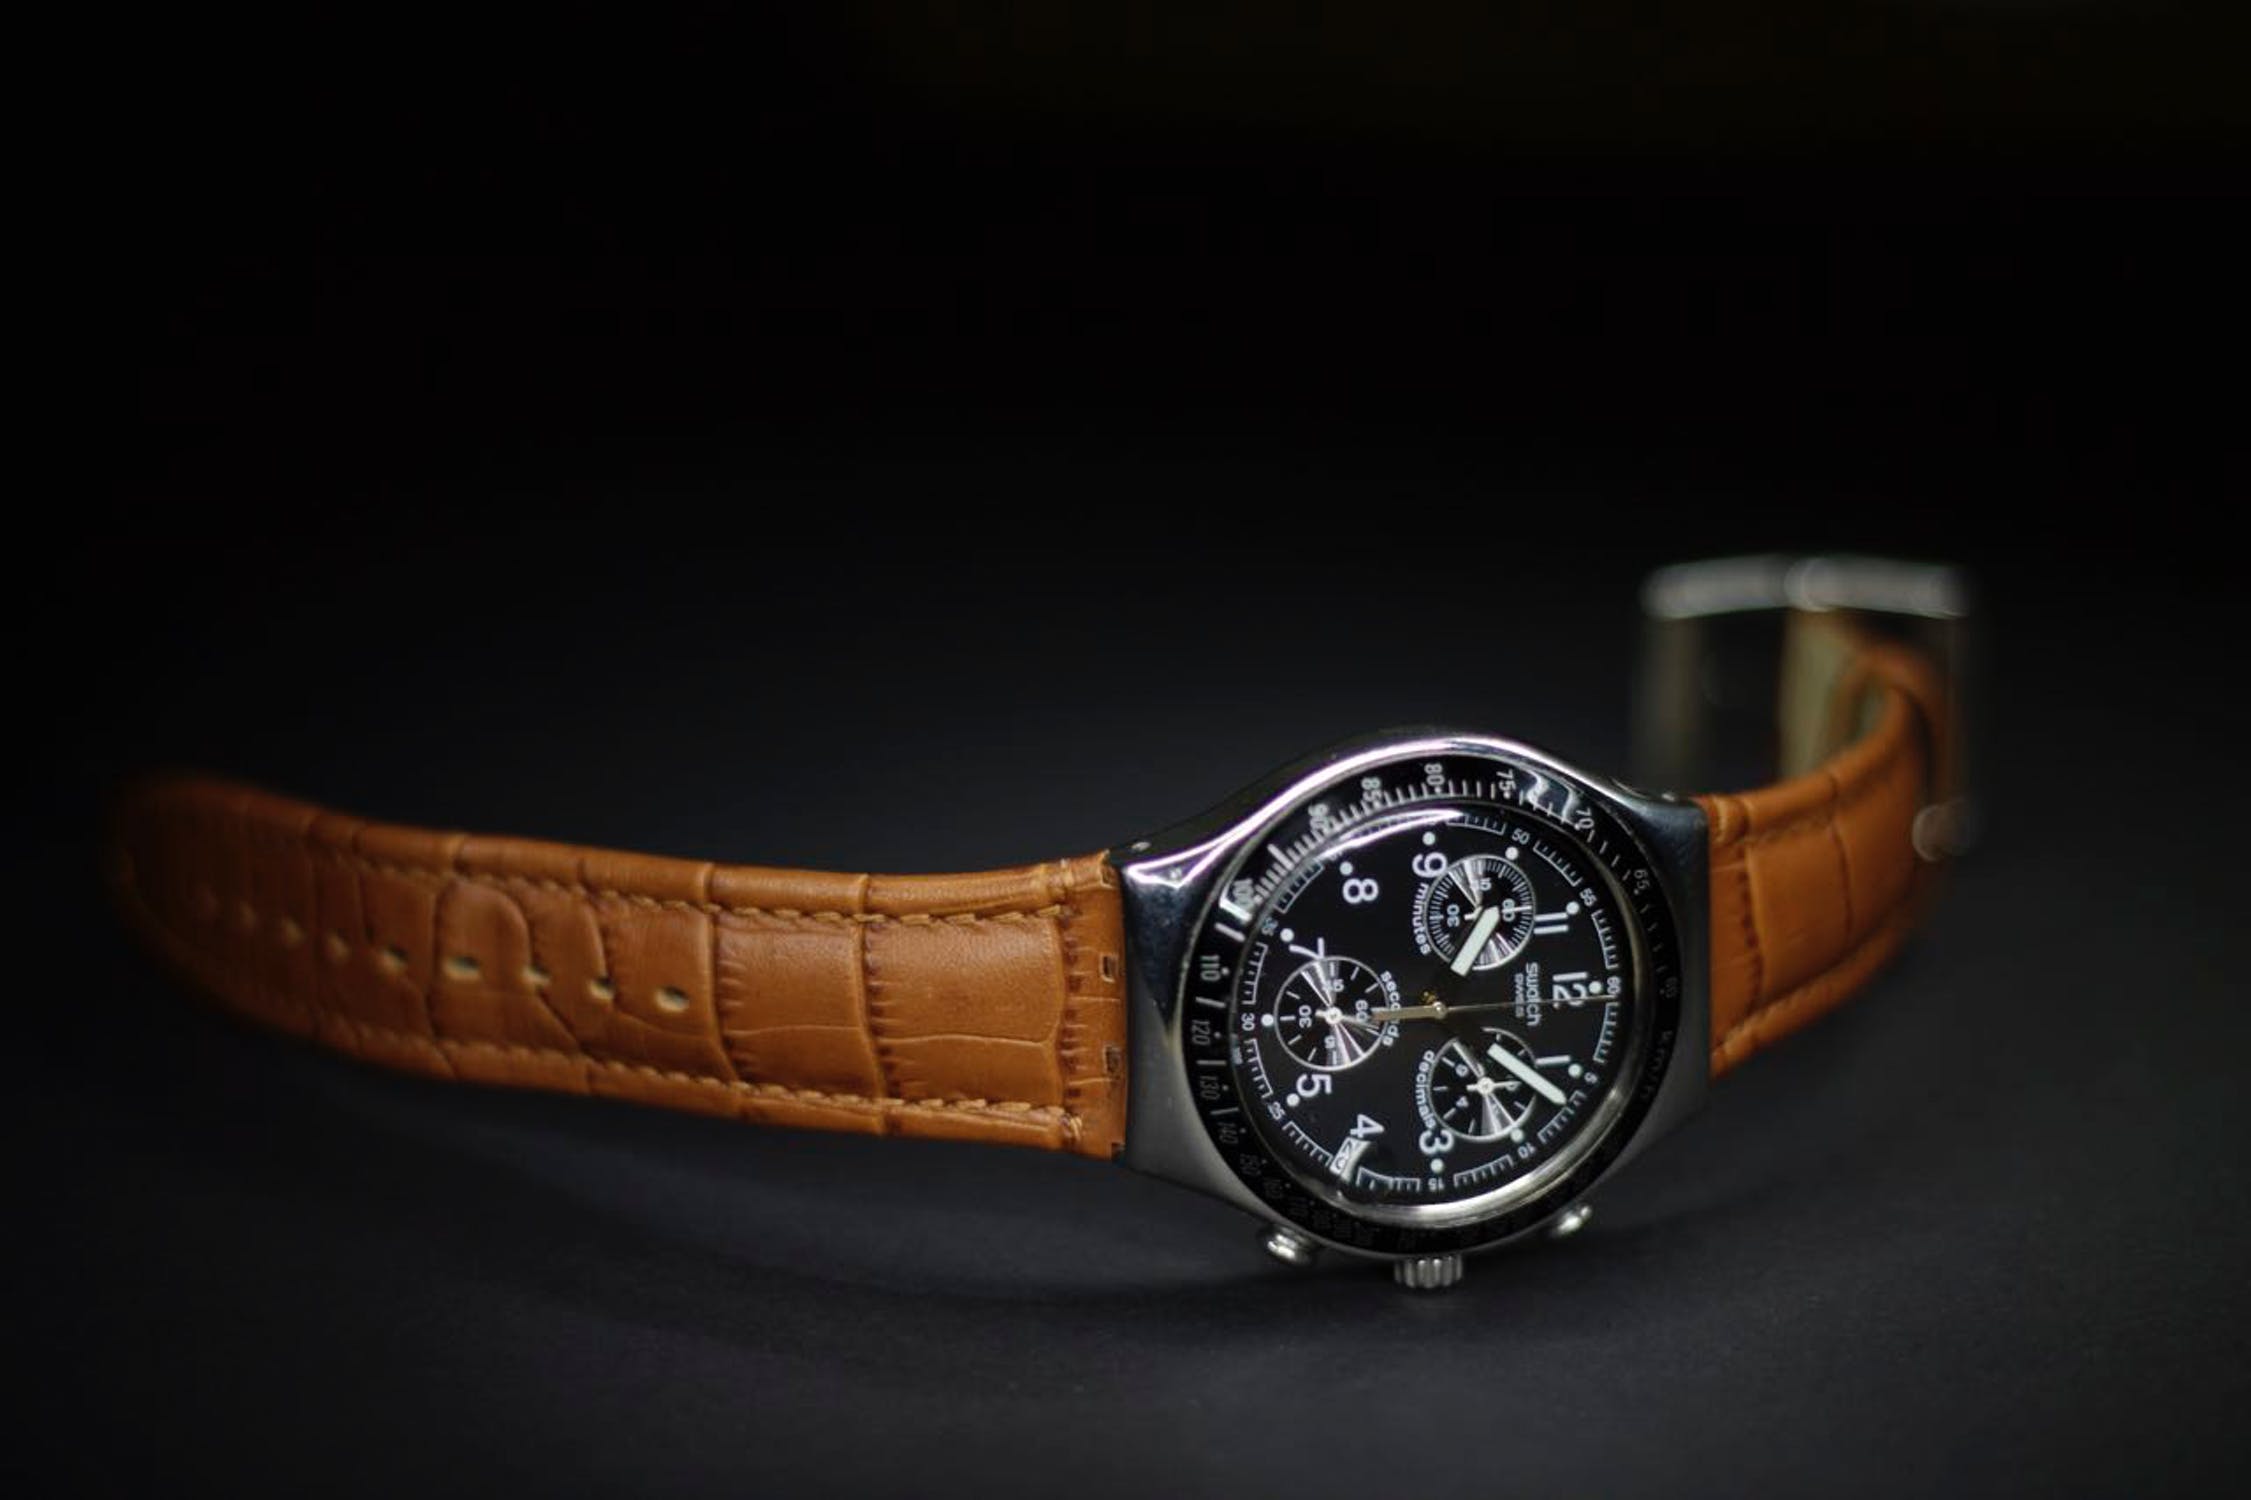 Classic leather-banded watch